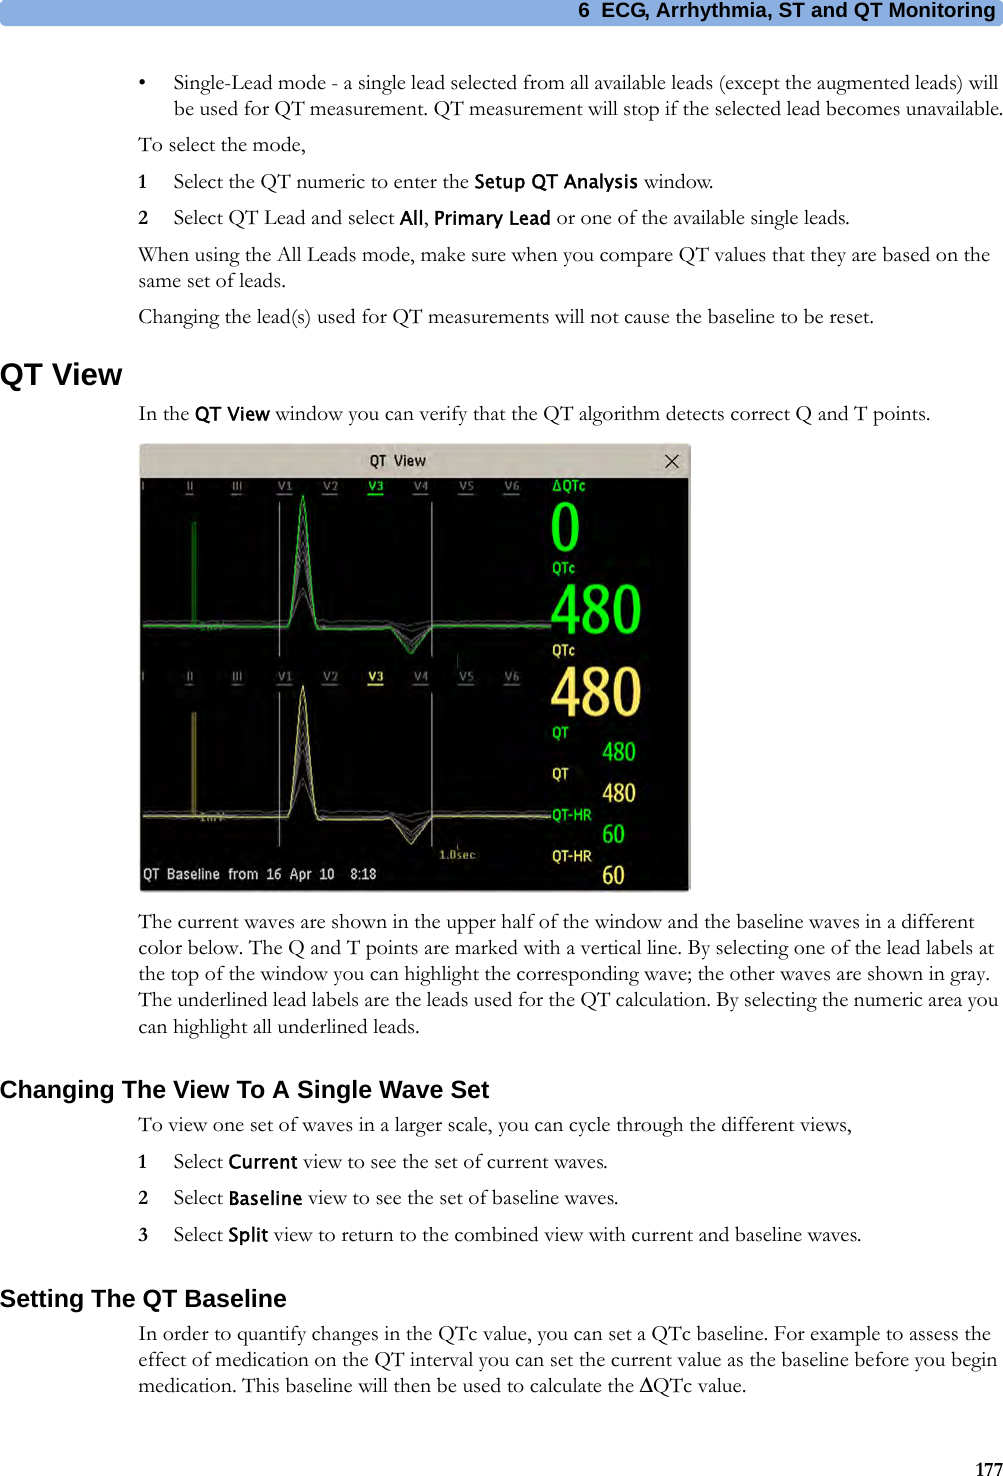 6 ECG, Arrhythmia, ST and QT Monitoring177• Single-Lead mode - a single lead selected from all available leads (except the augmented leads) will be used for QT measurement. QT measurement will stop if the selected lead becomes unavailable.To select the mode,1Select the QT numeric to enter the Setup QT Analysis window.2Select QT Lead and select All, Primary Lead or one of the available single leads.When using the All Leads mode, make sure when you compare QT values that they are based on the same set of leads.Changing the lead(s) used for QT measurements will not cause the baseline to be reset.QT ViewIn the QT View window you can verify that the QT algorithm detects correct Q and T points.The current waves are shown in the upper half of the window and the baseline waves in a different color below. The Q and T points are marked with a vertical line. By selecting one of the lead labels at the top of the window you can highlight the corresponding wave; the other waves are shown in gray. The underlined lead labels are the leads used for the QT calculation. By selecting the numeric area you can highlight all underlined leads.Changing The View To A Single Wave SetTo view one set of waves in a larger scale, you can cycle through the different views,1Select Current view to see the set of current waves.2Select Baseline view to see the set of baseline waves.3Select Split view to return to the combined view with current and baseline waves.Setting The QT BaselineIn order to quantify changes in the QTc value, you can set a QTc baseline. For example to assess the effect of medication on the QT interval you can set the current value as the baseline before you begin medication. This baseline will then be used to calculate the ΔQTc value.